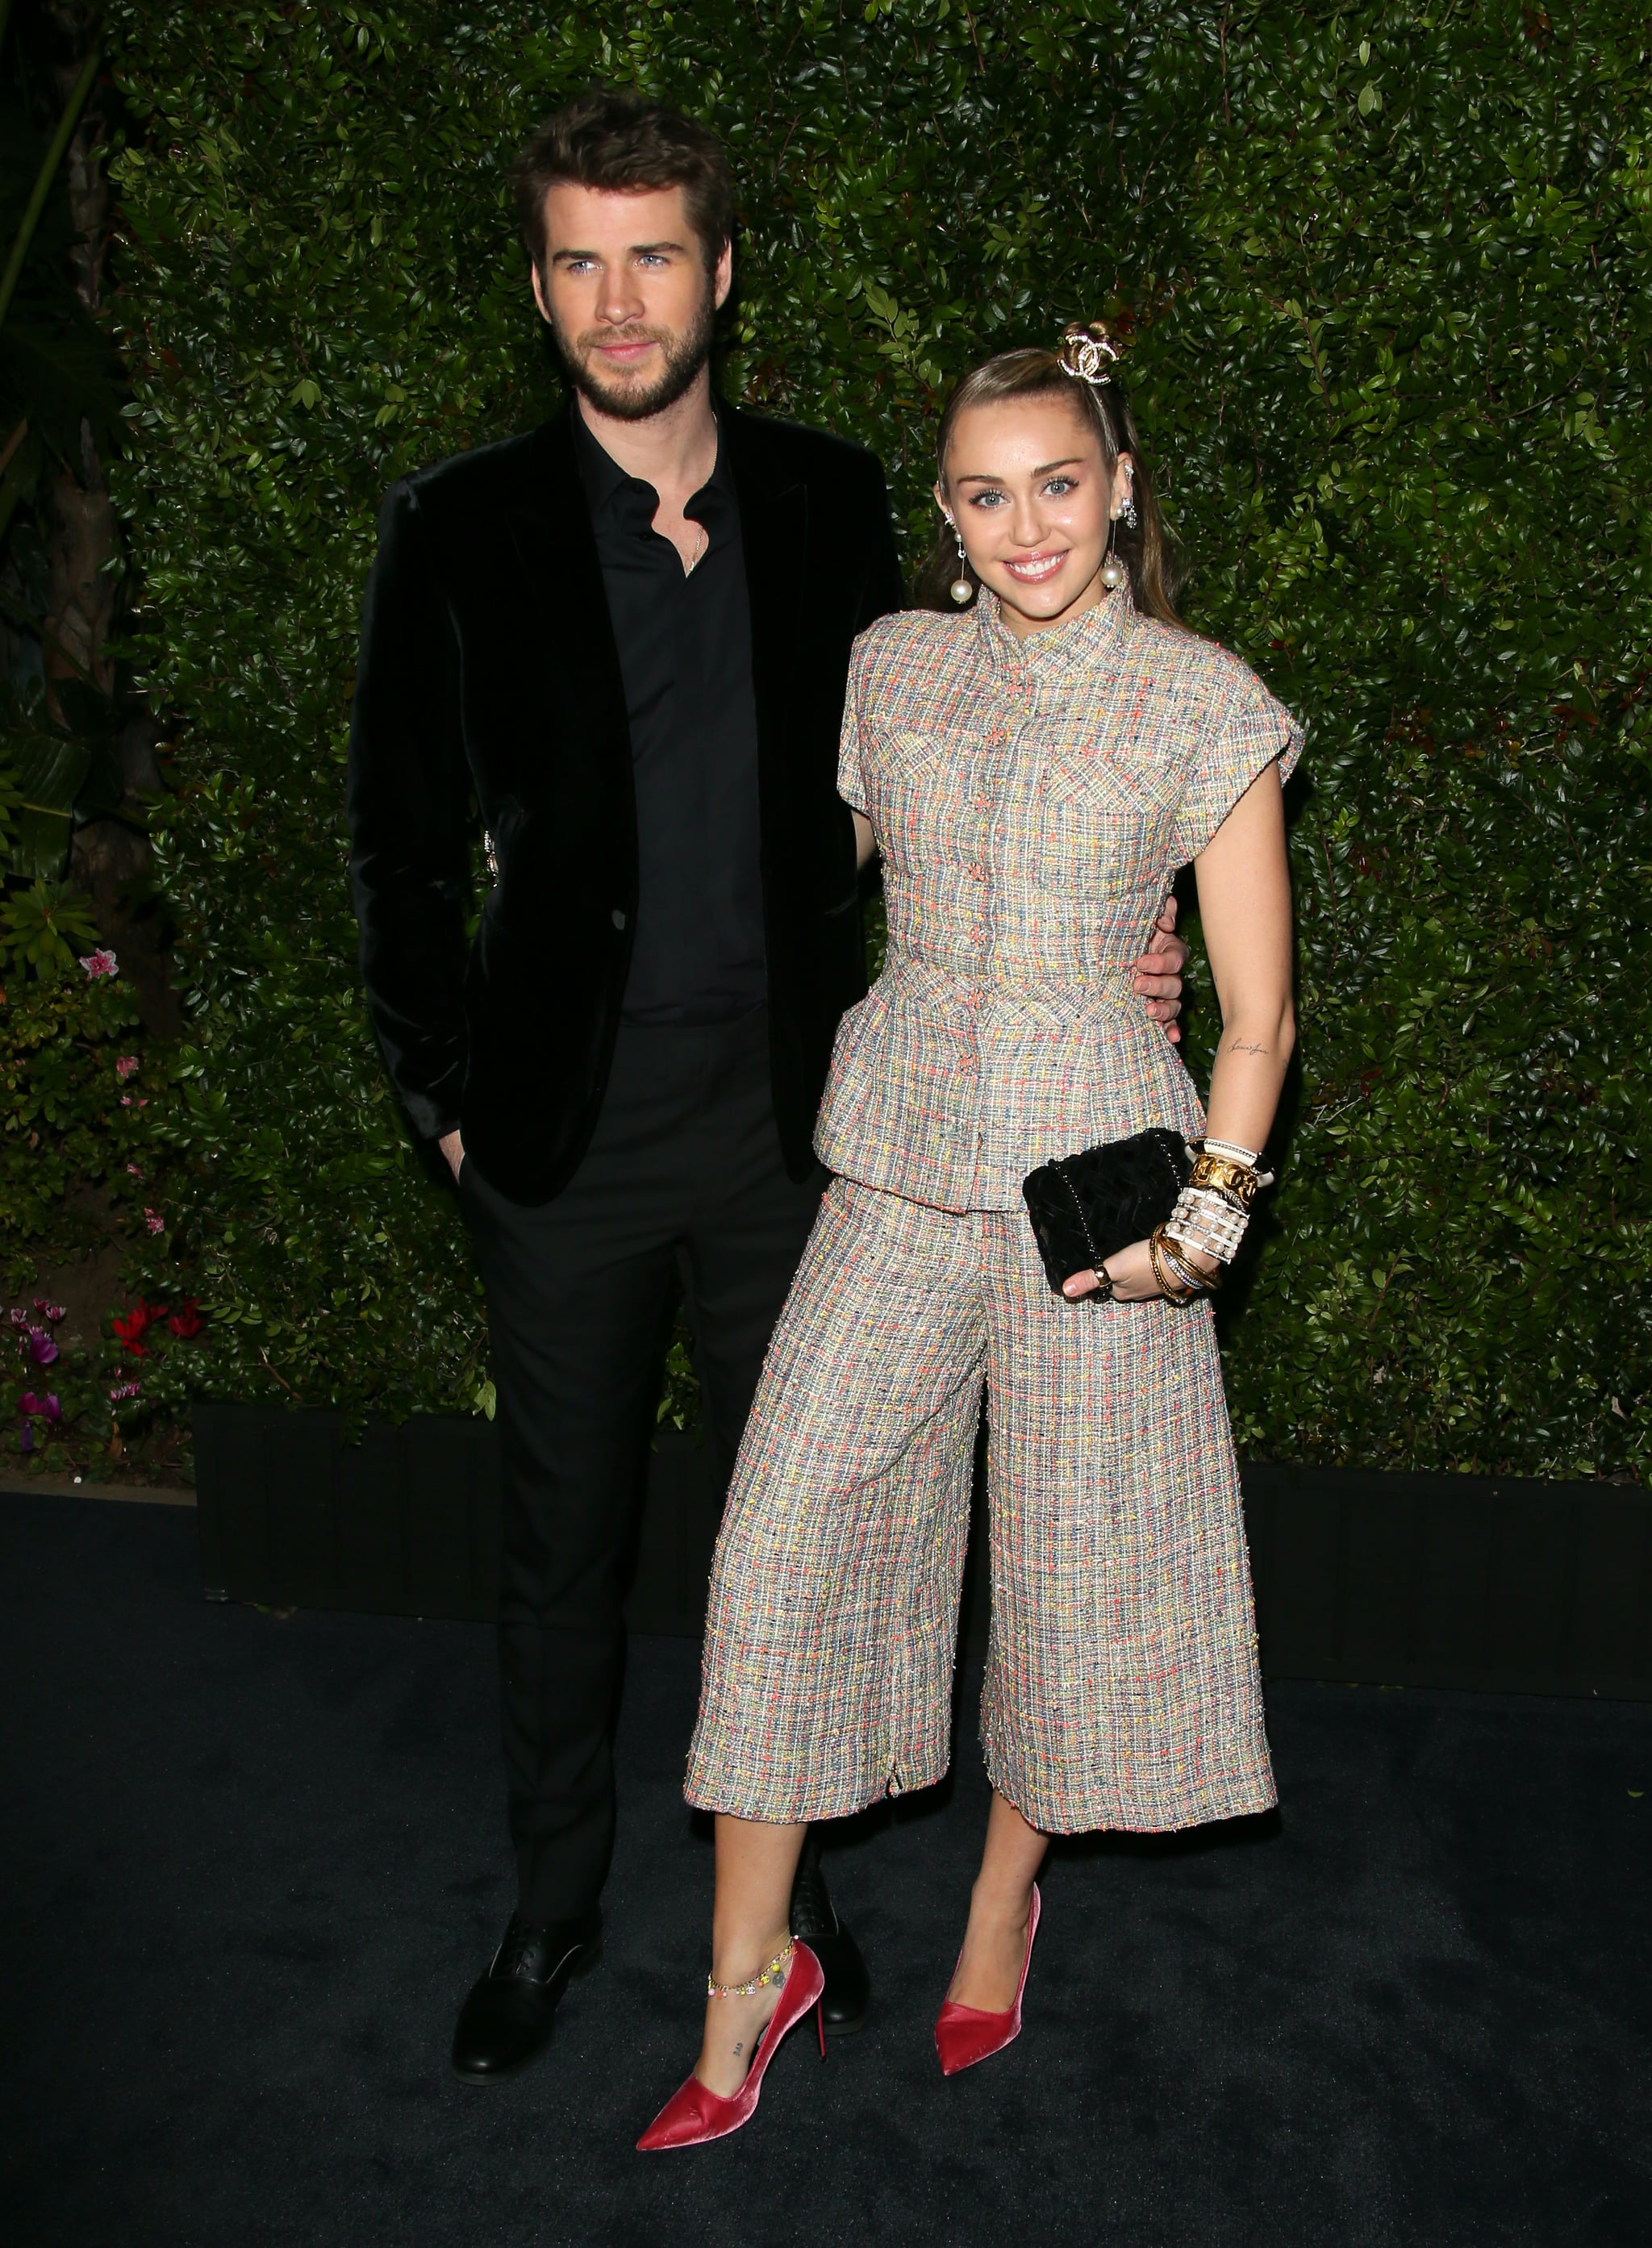 Miley Cyrus's Outfit at Chanel Oscars Preparty Feb. 2019